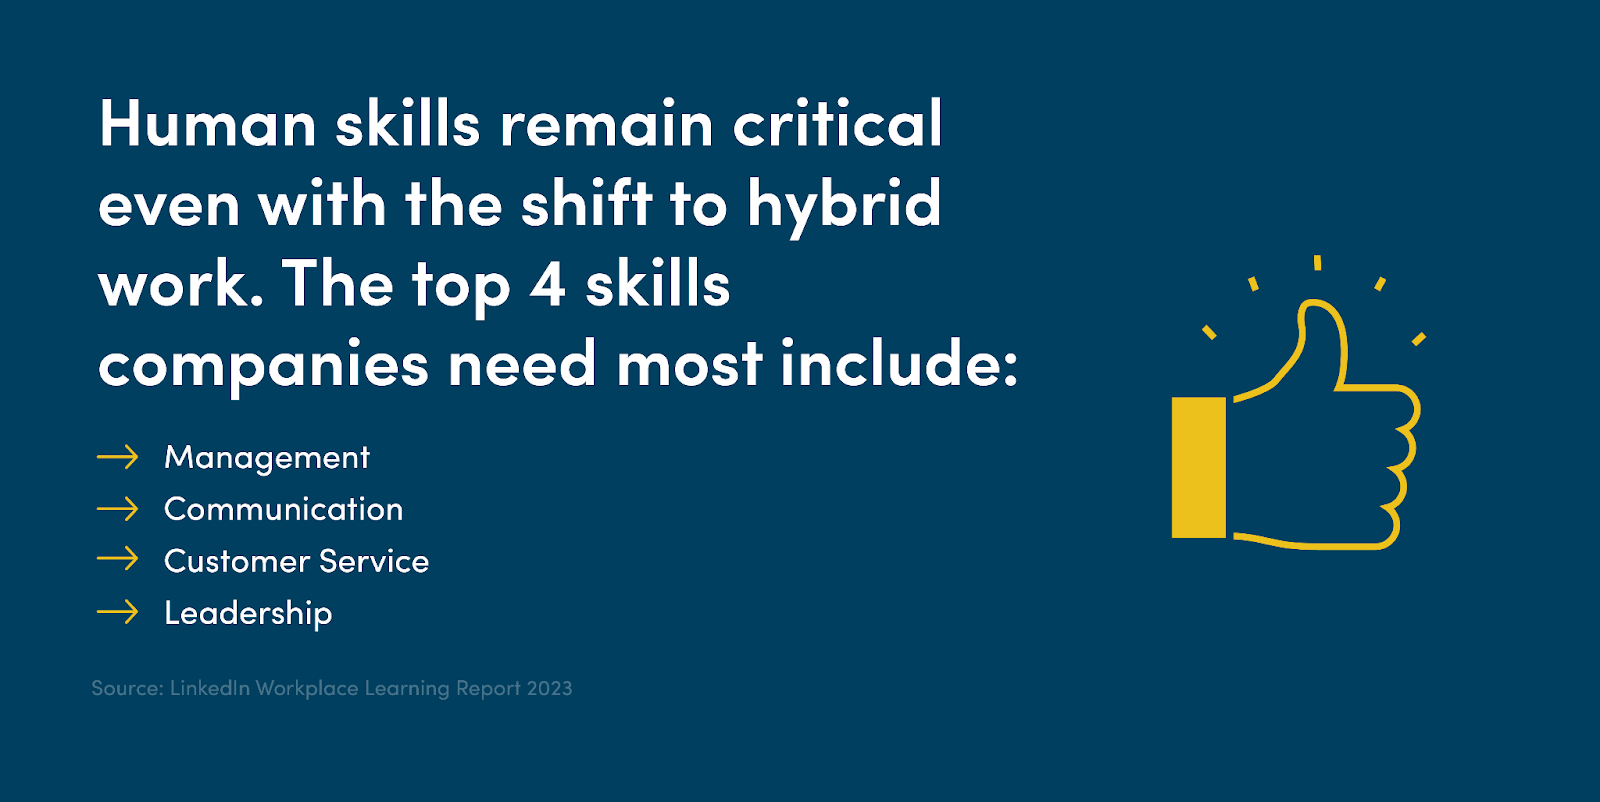 Human skills remain critical even with the shift to hybrid work. The top 4 skills companies need most include management, communication, customer service, and leadership